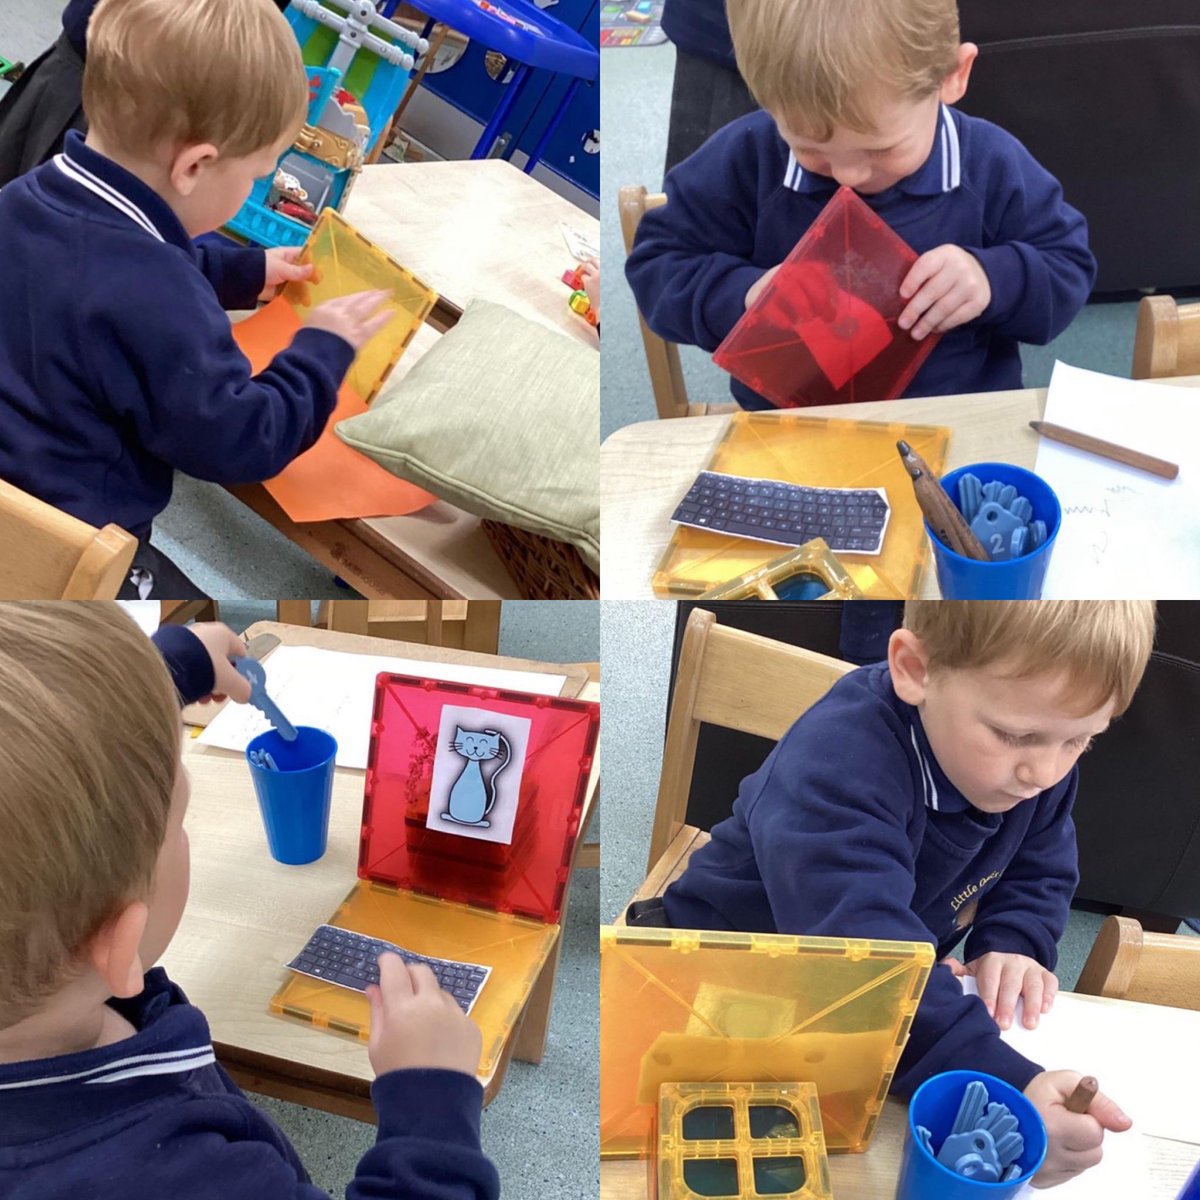 Today E was building, he said he was making a laptop. E helped me to find a picture of a keyboard and said he would like a blue cat on his screen. E set about creating his laptop and then did some work in his little office 📝 #inthemomentplanning @WybertonPrimary @InfinityAcad